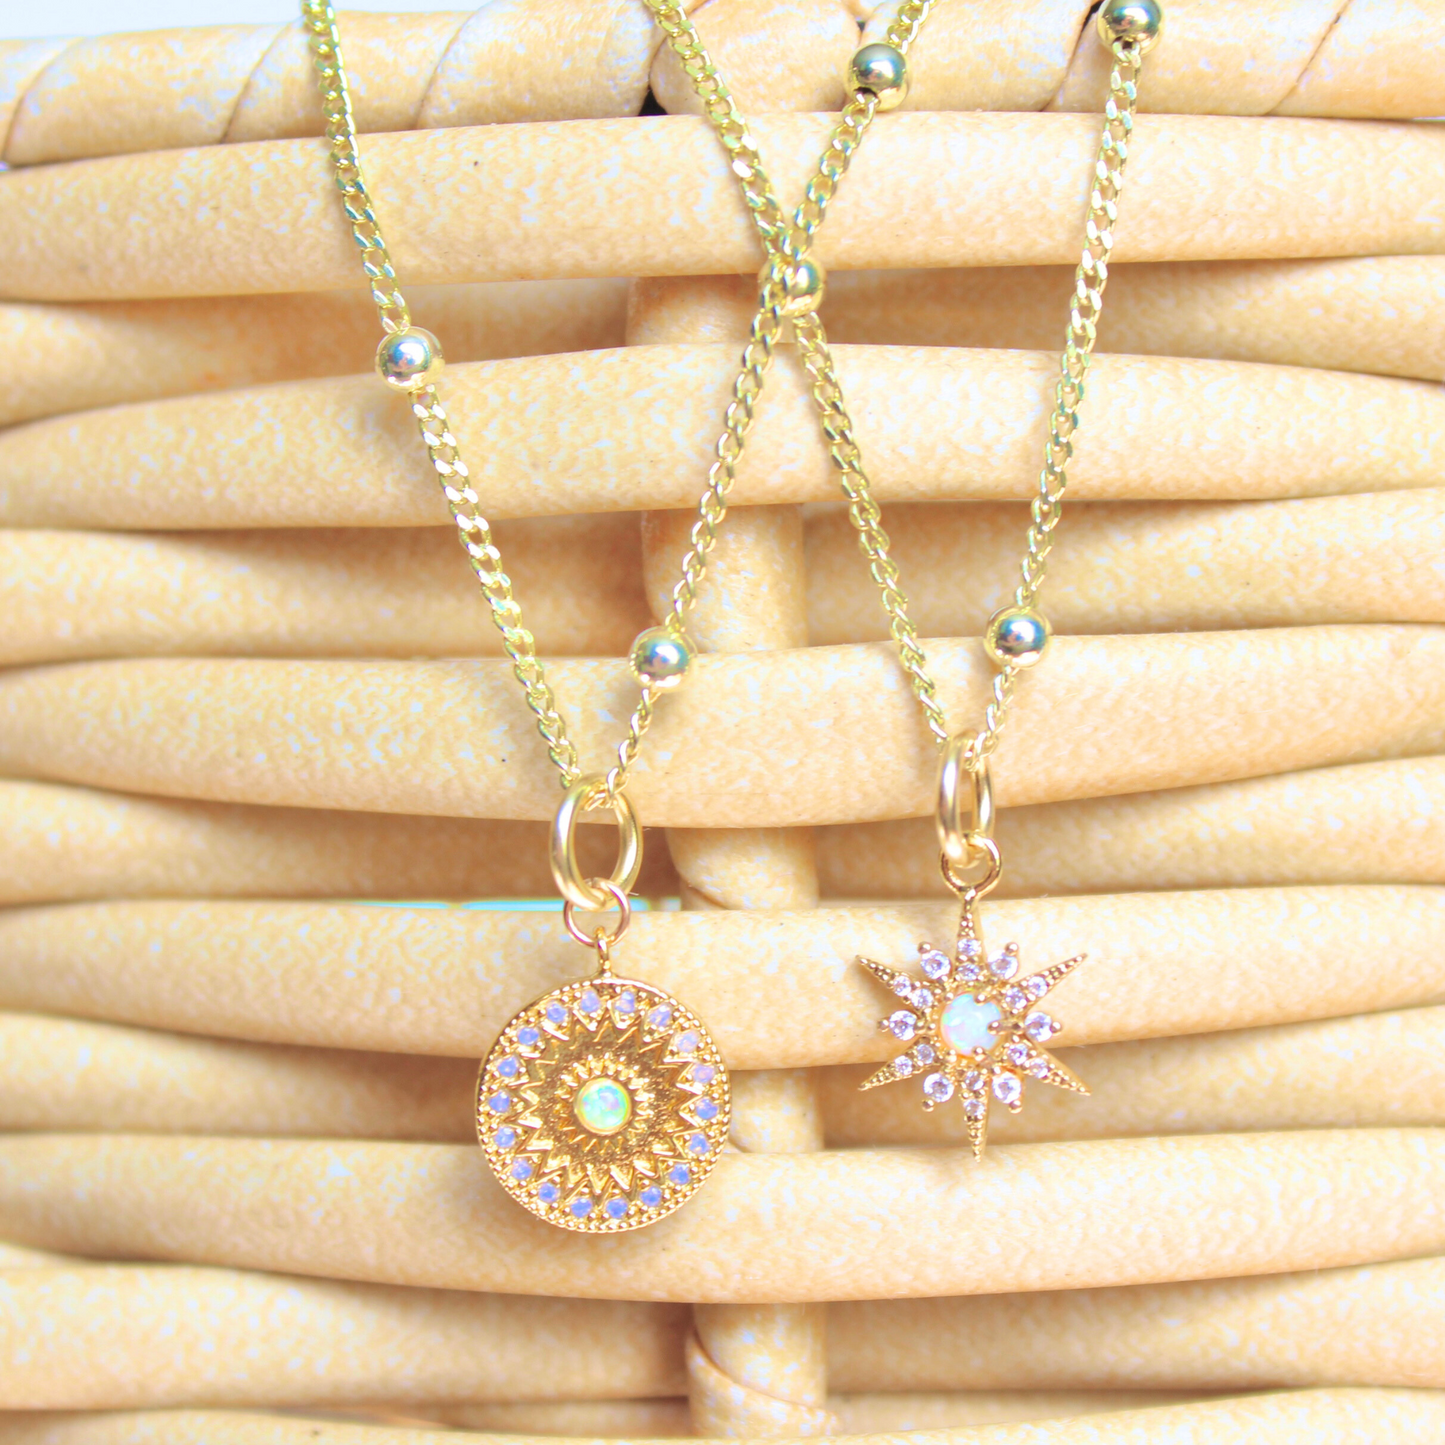 14k Gold Filled Satellite Necklace with Circular Coin Opal Pendant